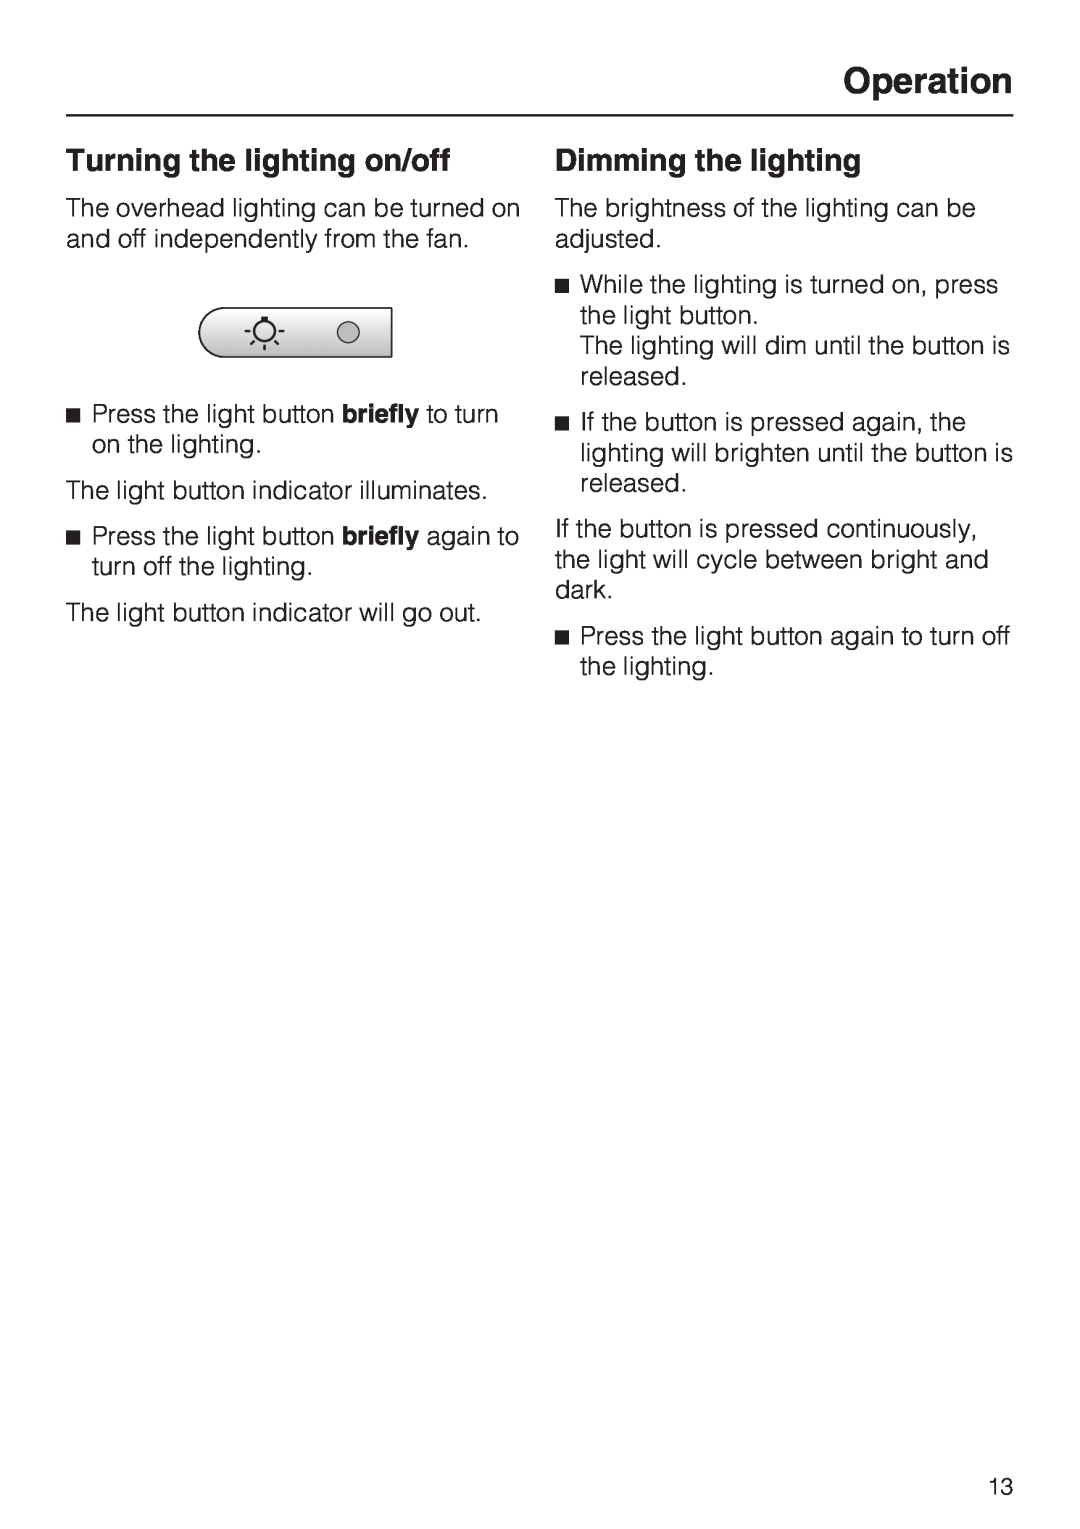 Miele DA409, DA408 installation instructions Turning the lighting on/off, Dimming the lighting, Operation 